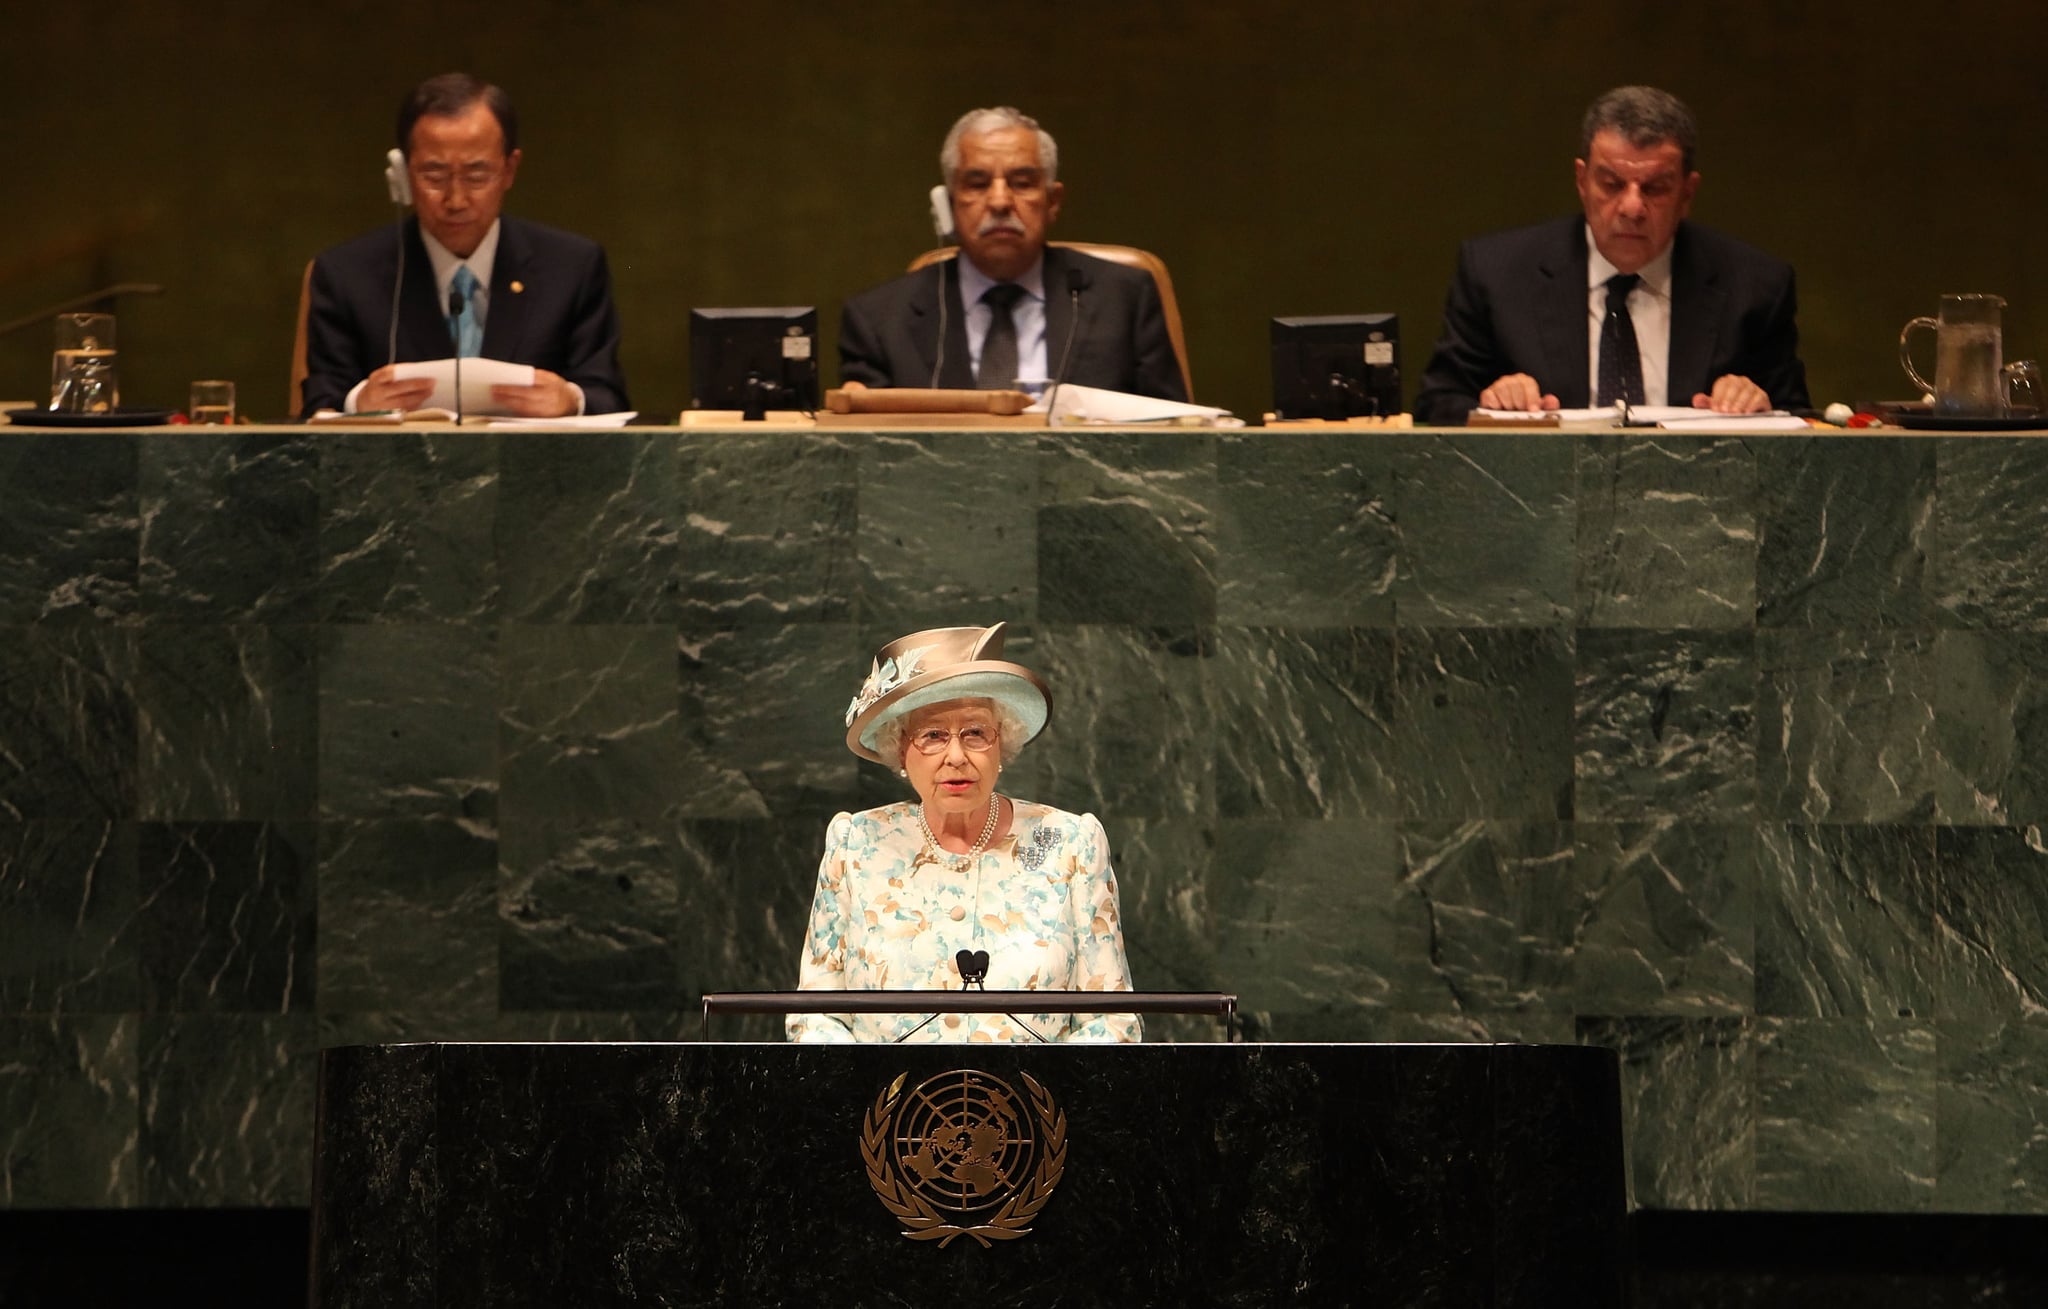 Queen Elizabeth II addresses the United Nations General Assembly in 2010